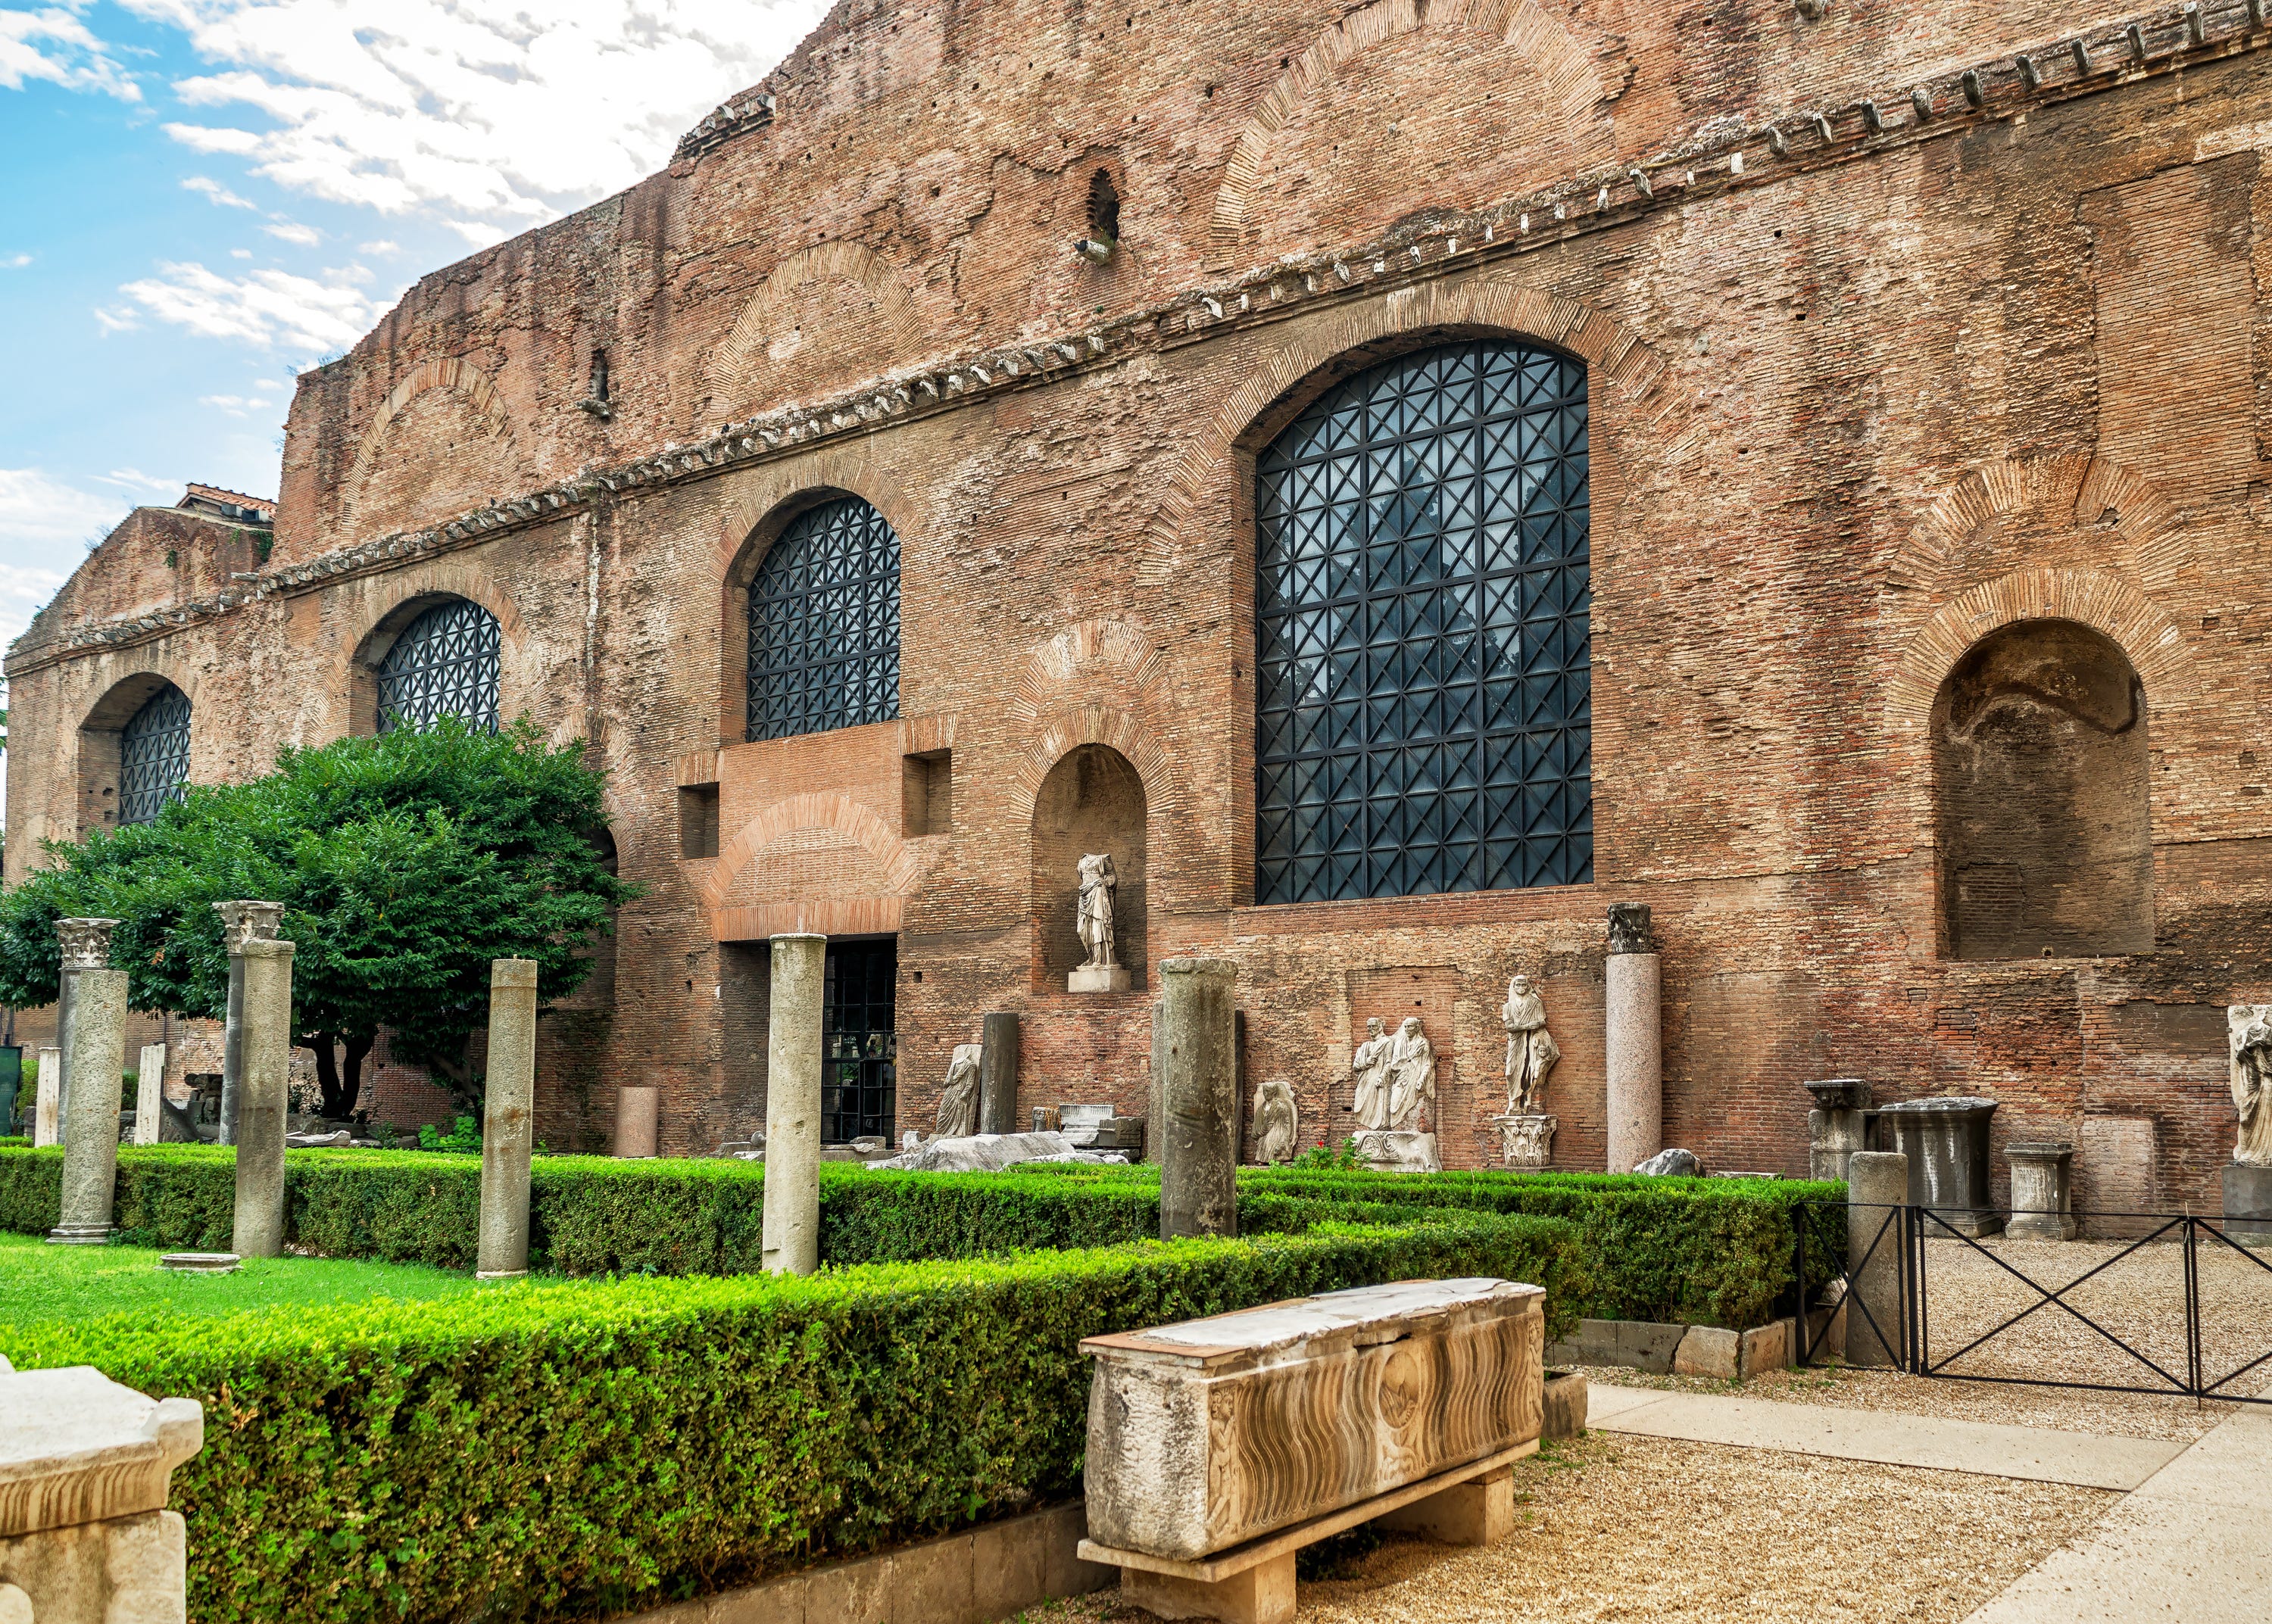 <p>If you've ever wondered how the Romans bathed, then the Baths of Diocletian are a must-see site. </p><p>The massive archeological complex, located near the Termini train station, was built by the emperor Maximian between 298 and 306 CE. </p><p>At its height, the roughly 32-acre complex could welcome up to 3,000 people. Today, the area comprises the remains of the baths, a museum, and a church and charterhouse. </p><p>Much of the space is open to the elements, so I would recommend only visiting on a nice day.</p>